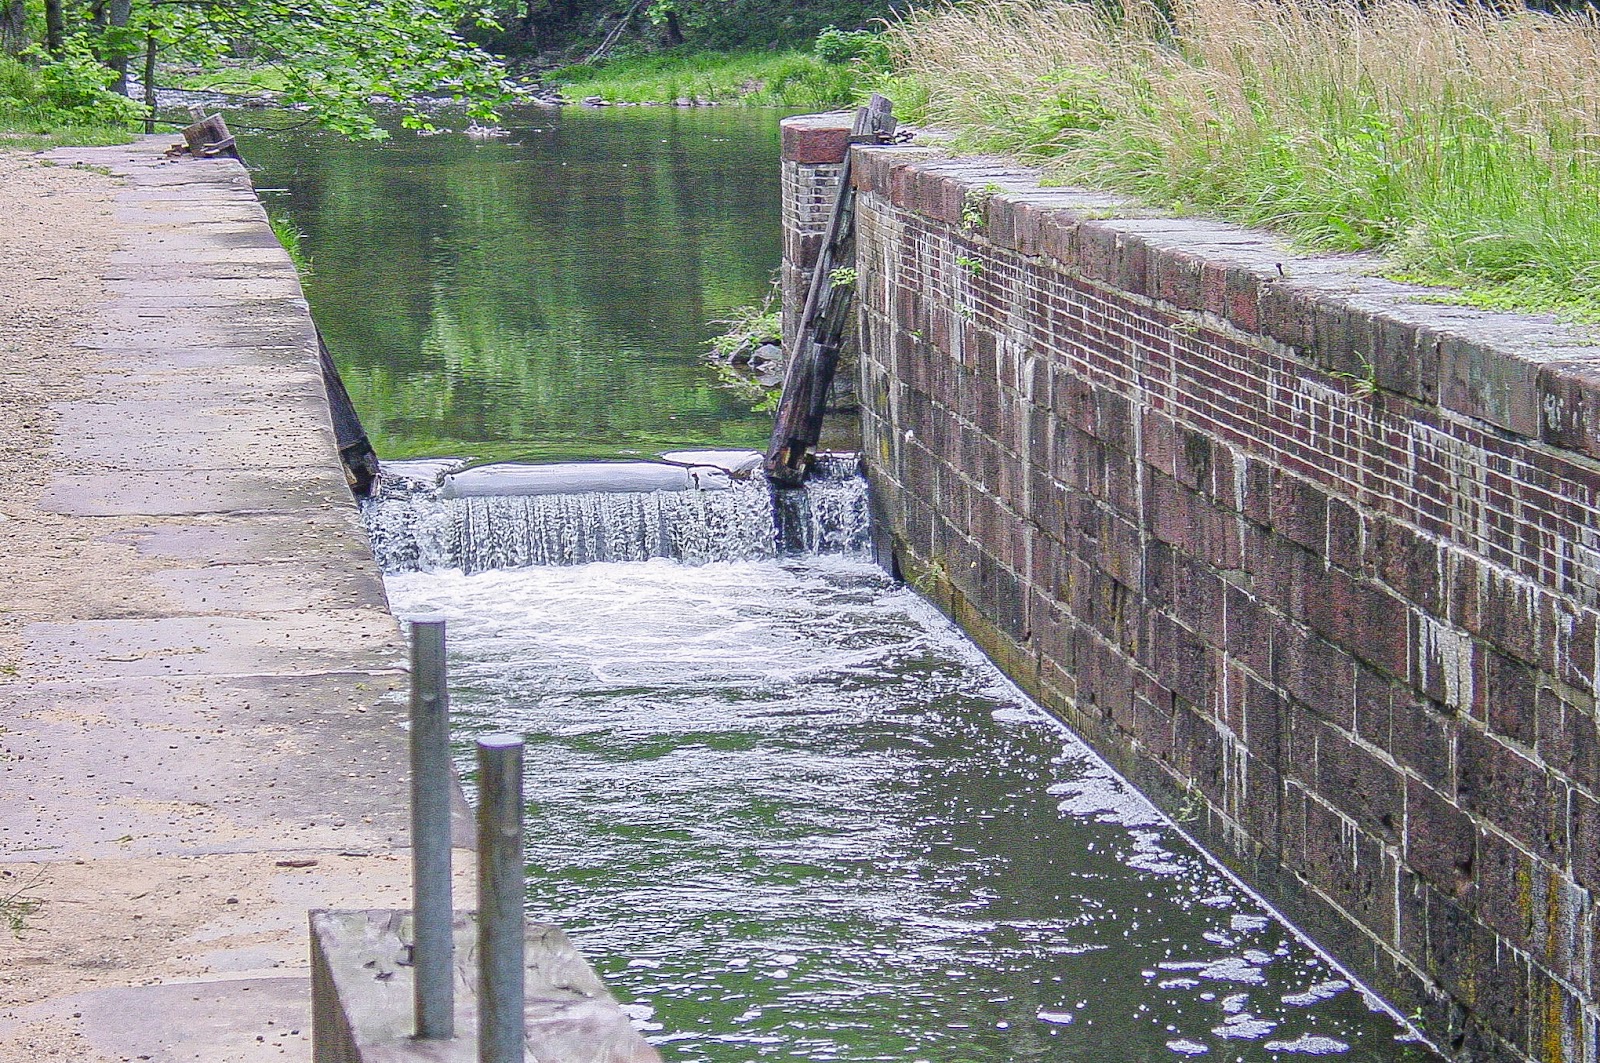 Water trickles over one end of a narrow channel with thick bricks on either side. 